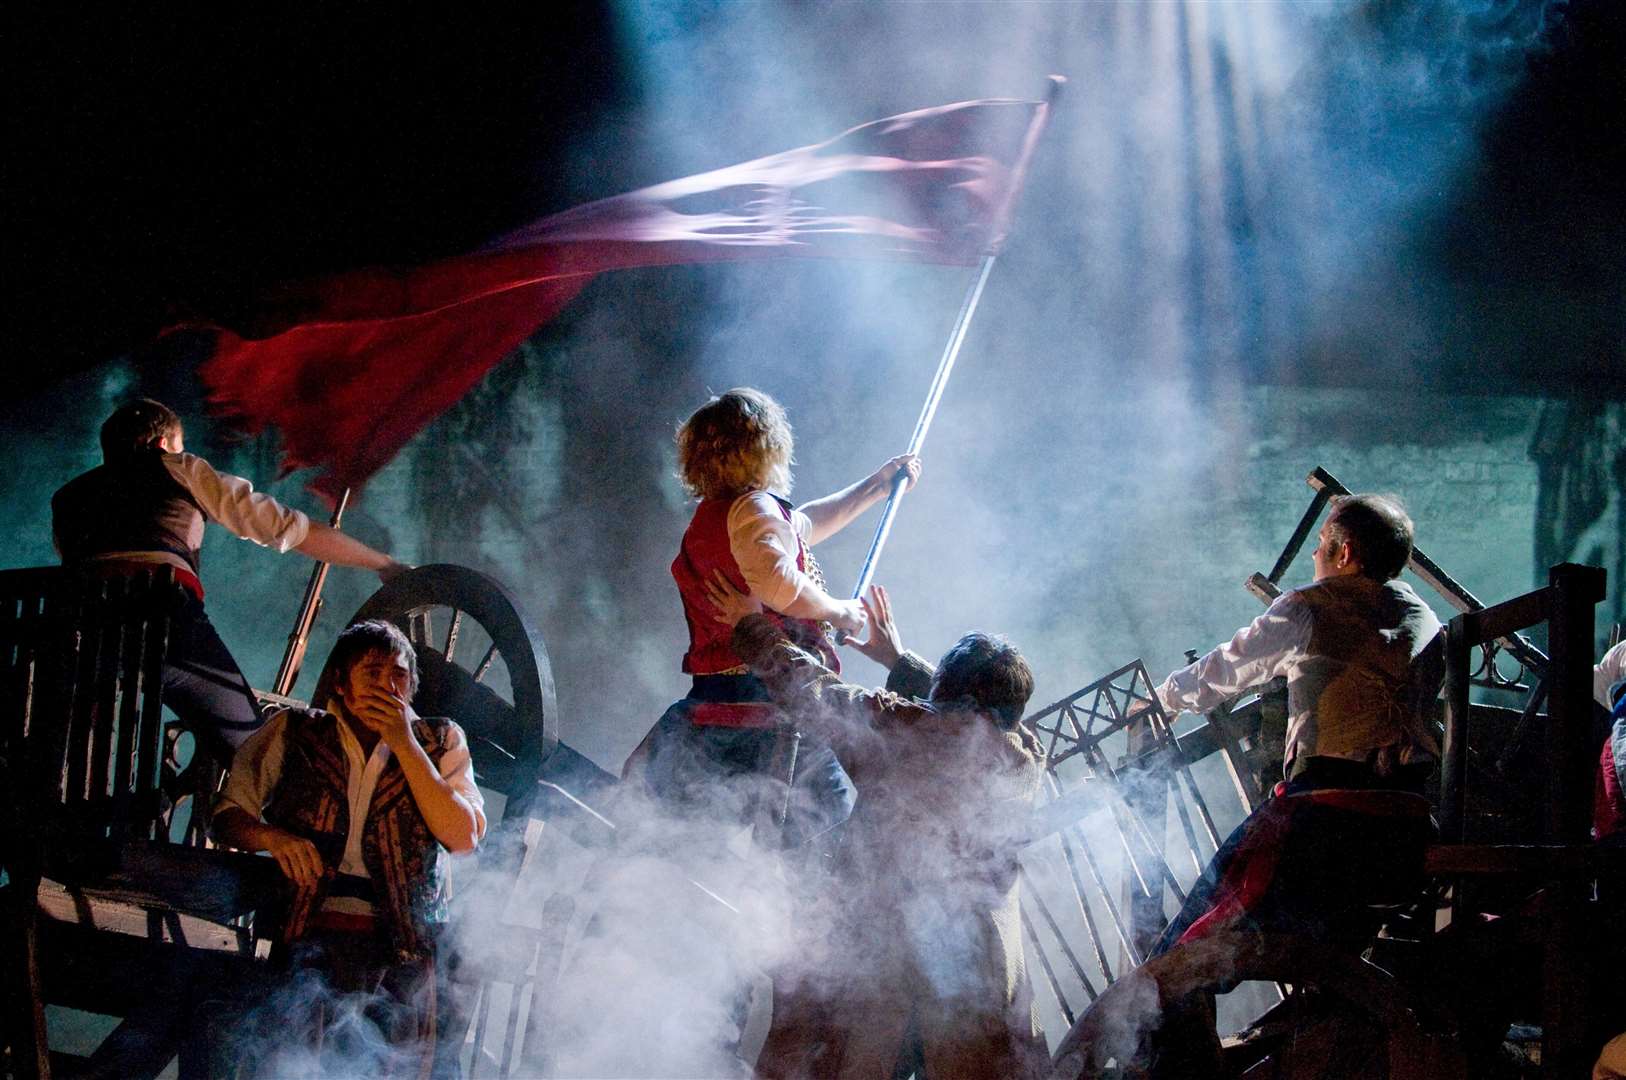 Les Misérables is coming to the Marlowe in Canterbury